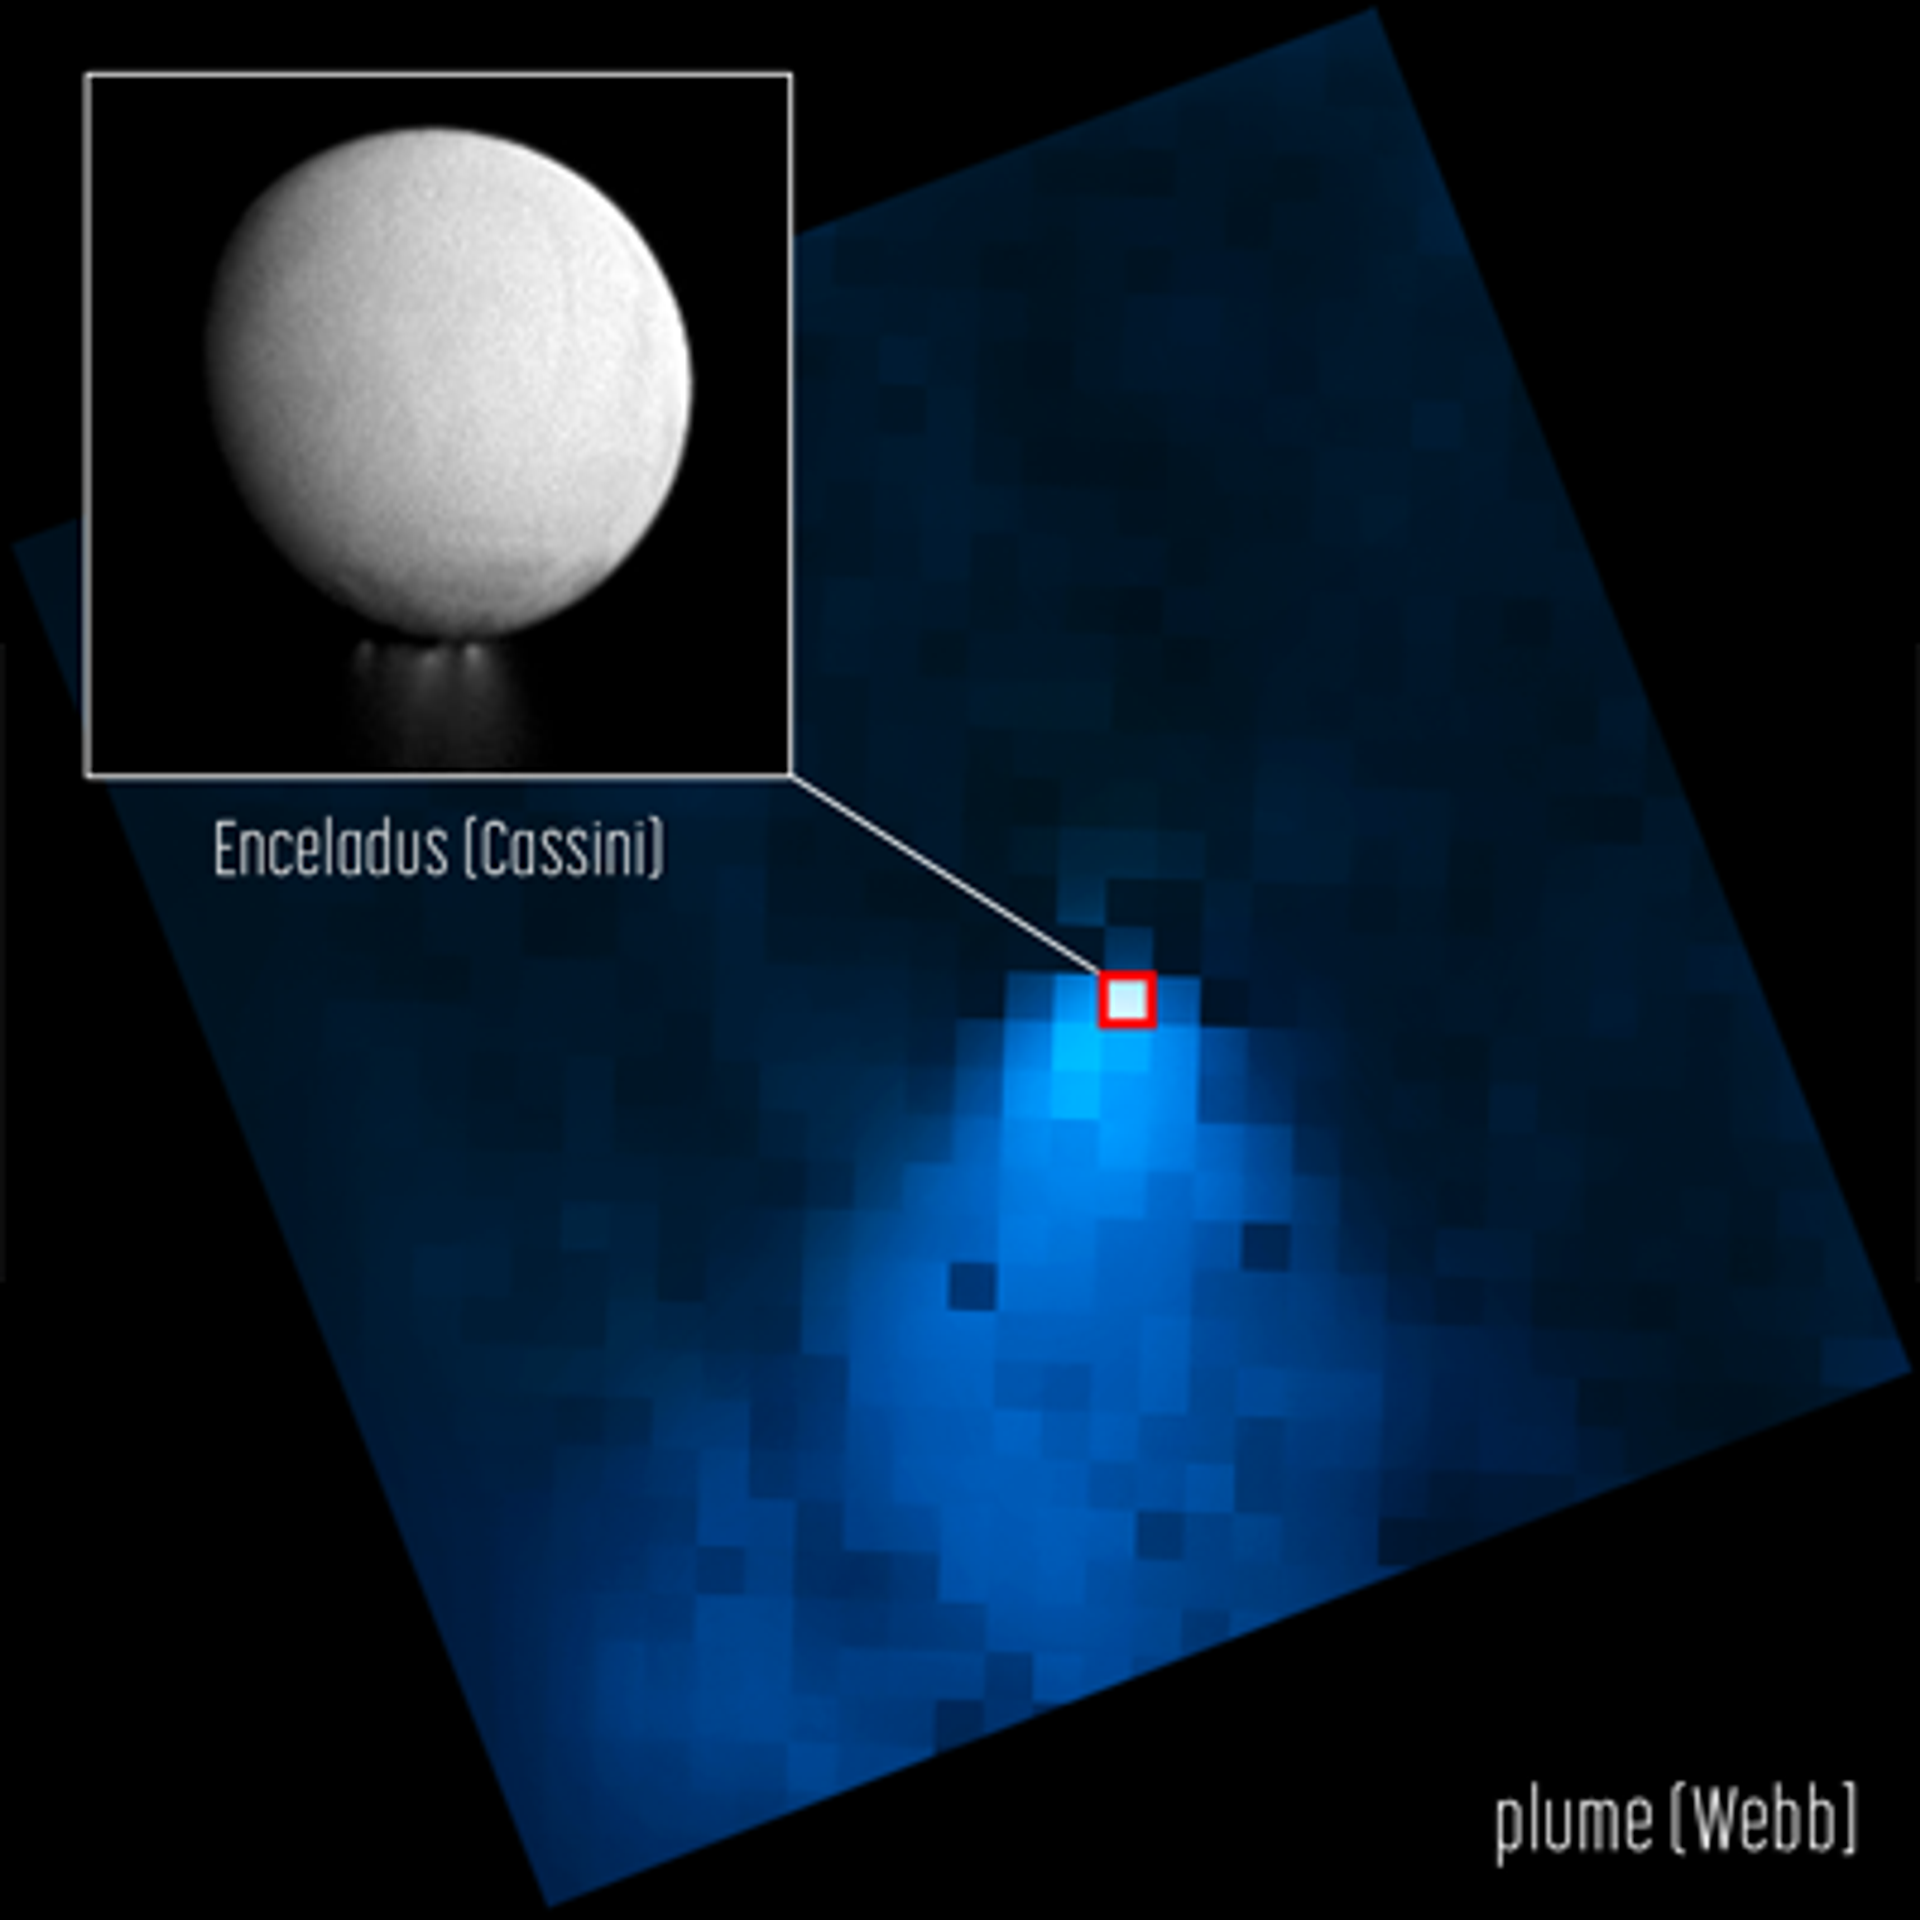 Image of the water geyser plume observed on Saturn's moon Enceladus by the James Webb Space Telescope in November 2022, with an insert of the Cassini spacecraft's photo of Enceladus - Sputnik International, 1920, 30.05.2023